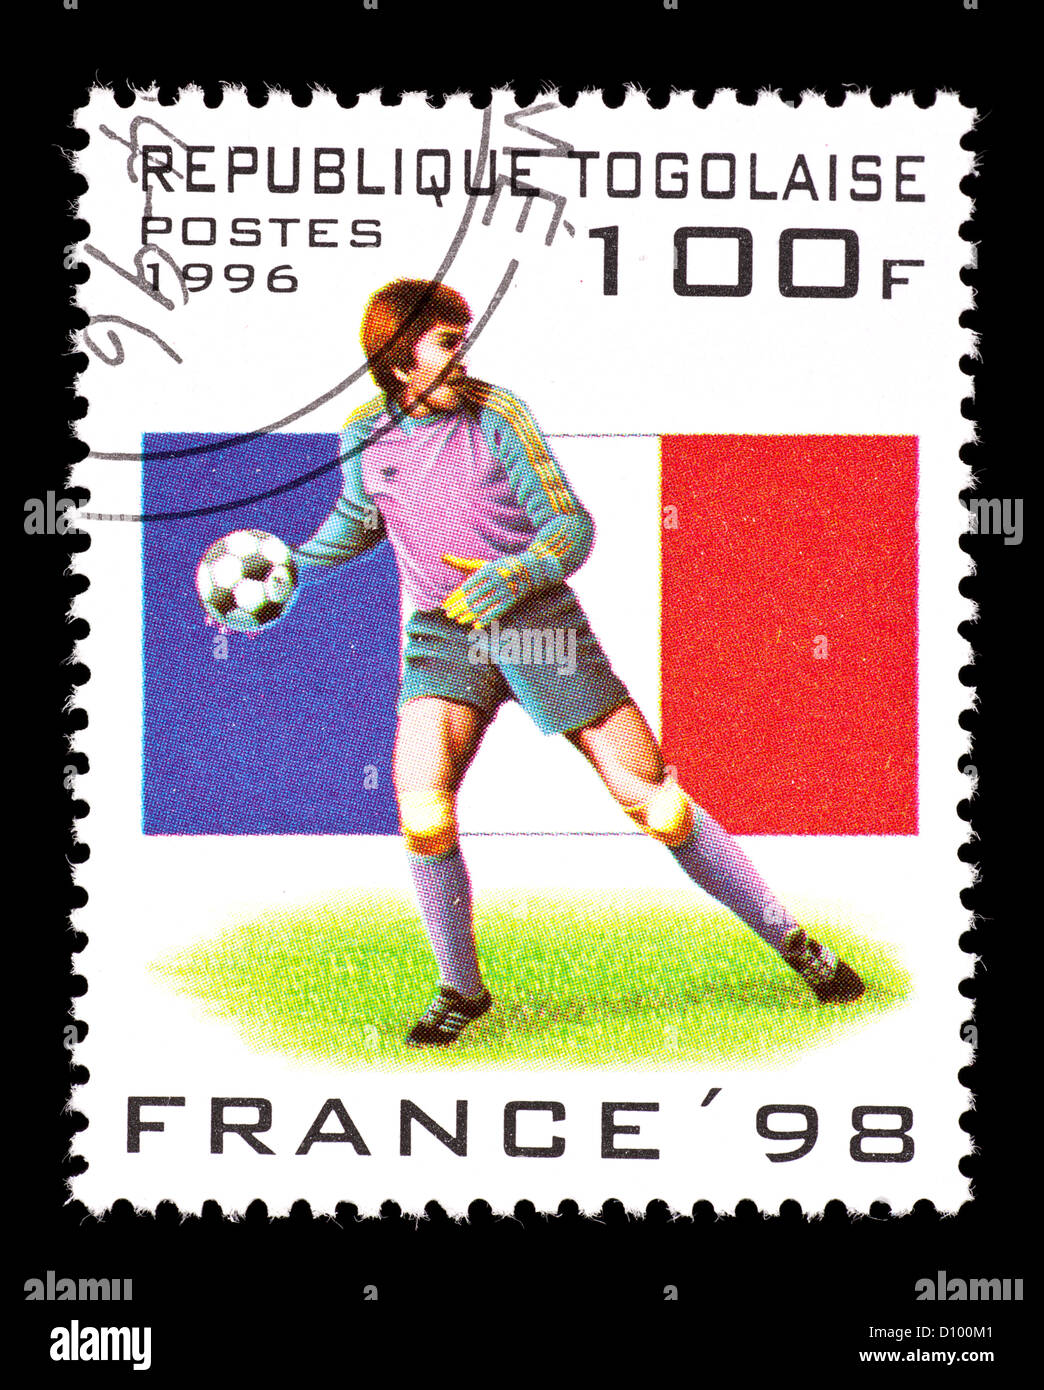 Postage stamp from Togo depicting a soccer goalkeeper, issued for the 1998 World Cup in France. Stock Photo